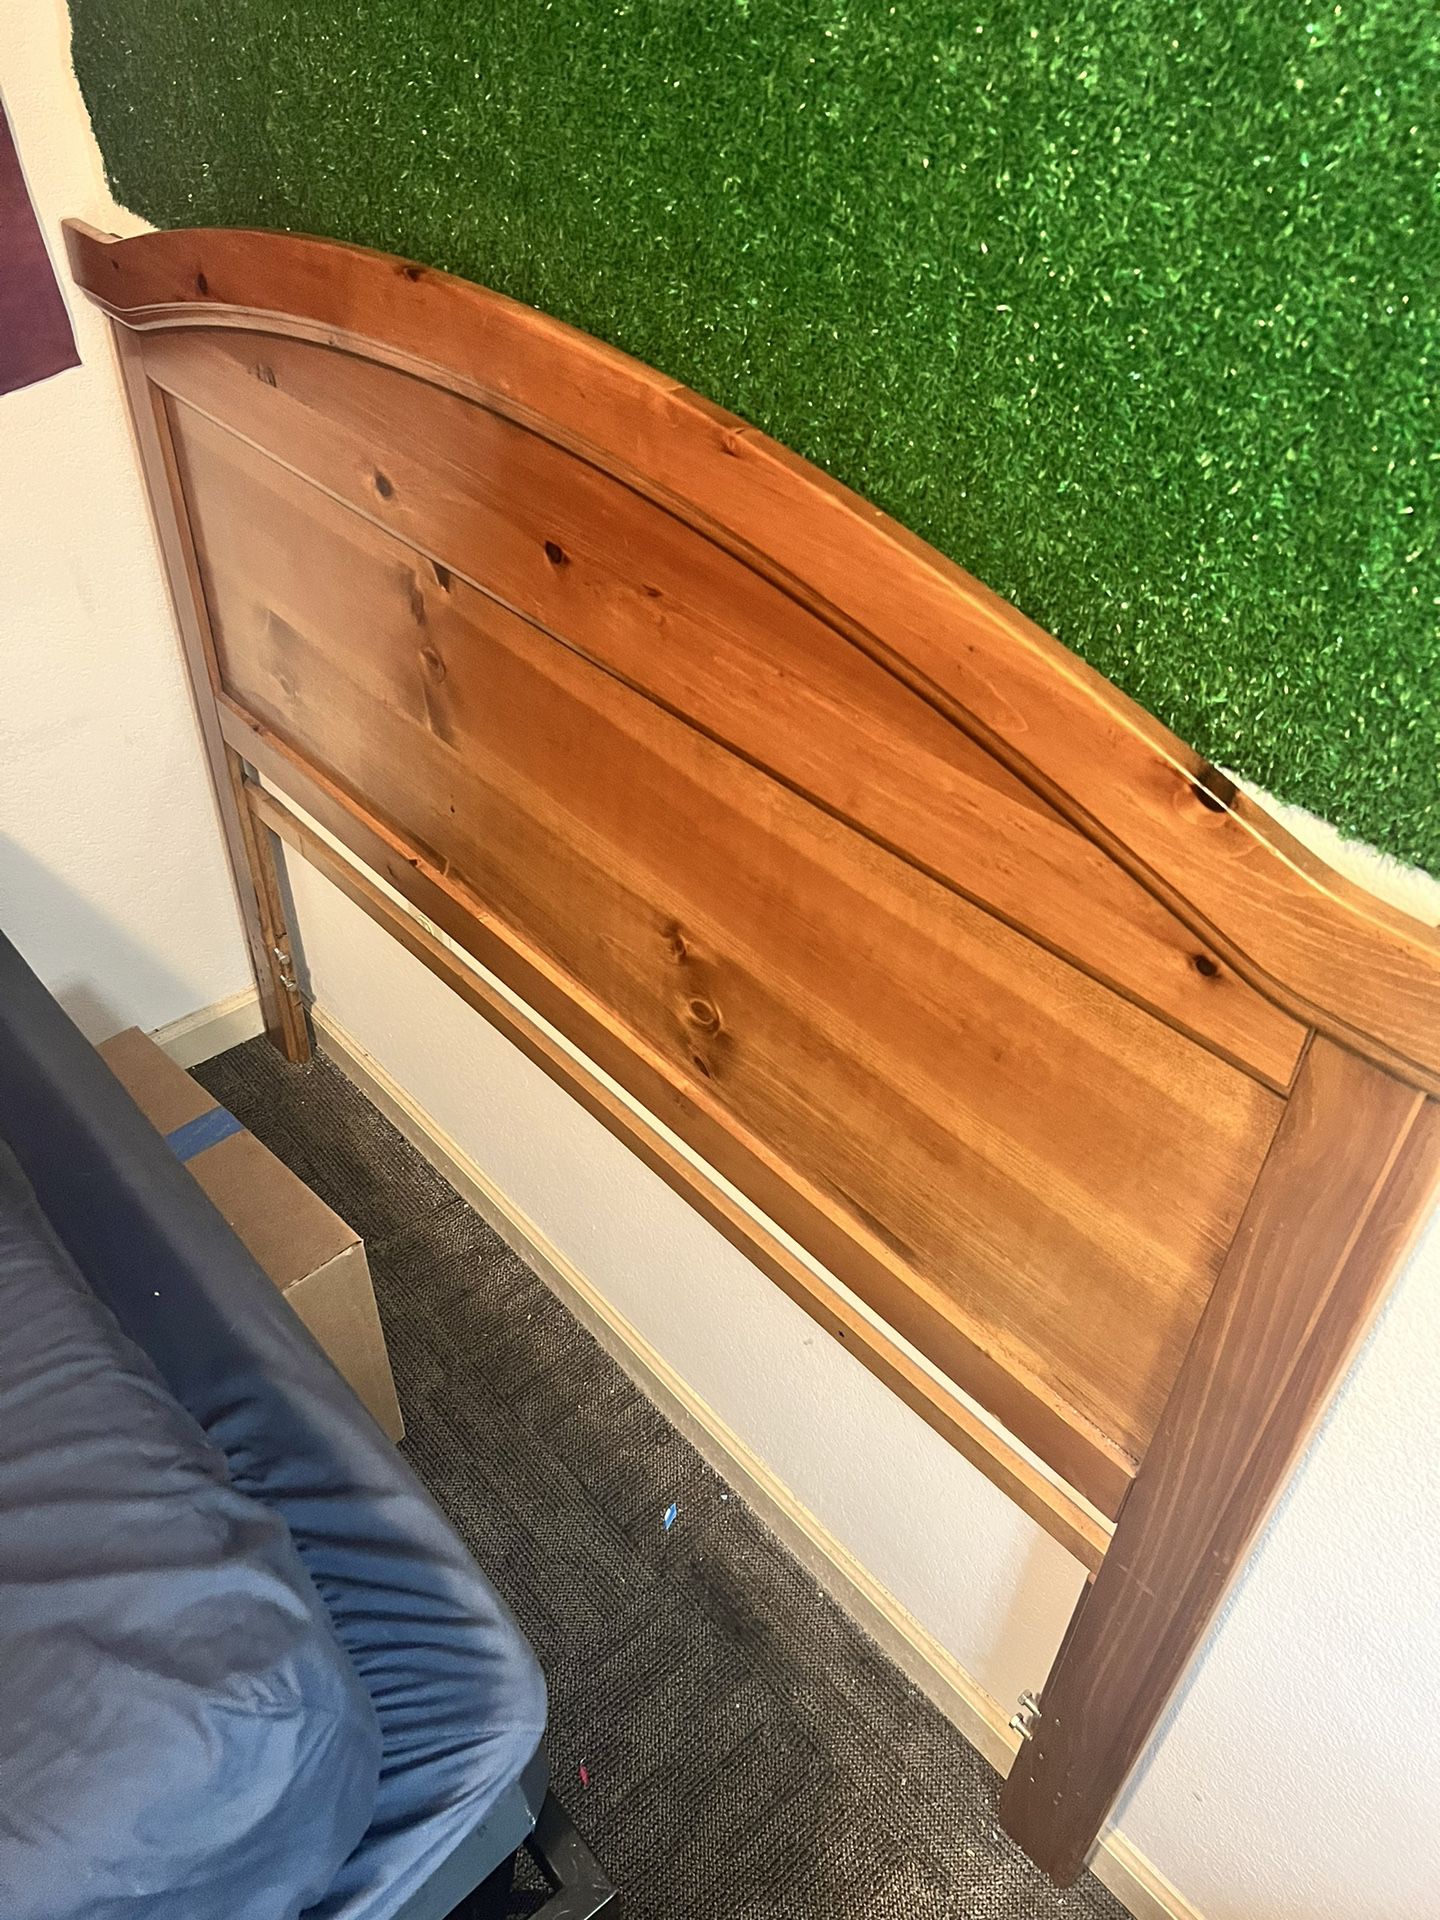 Wooden Headboard For A Queen Sized Bed